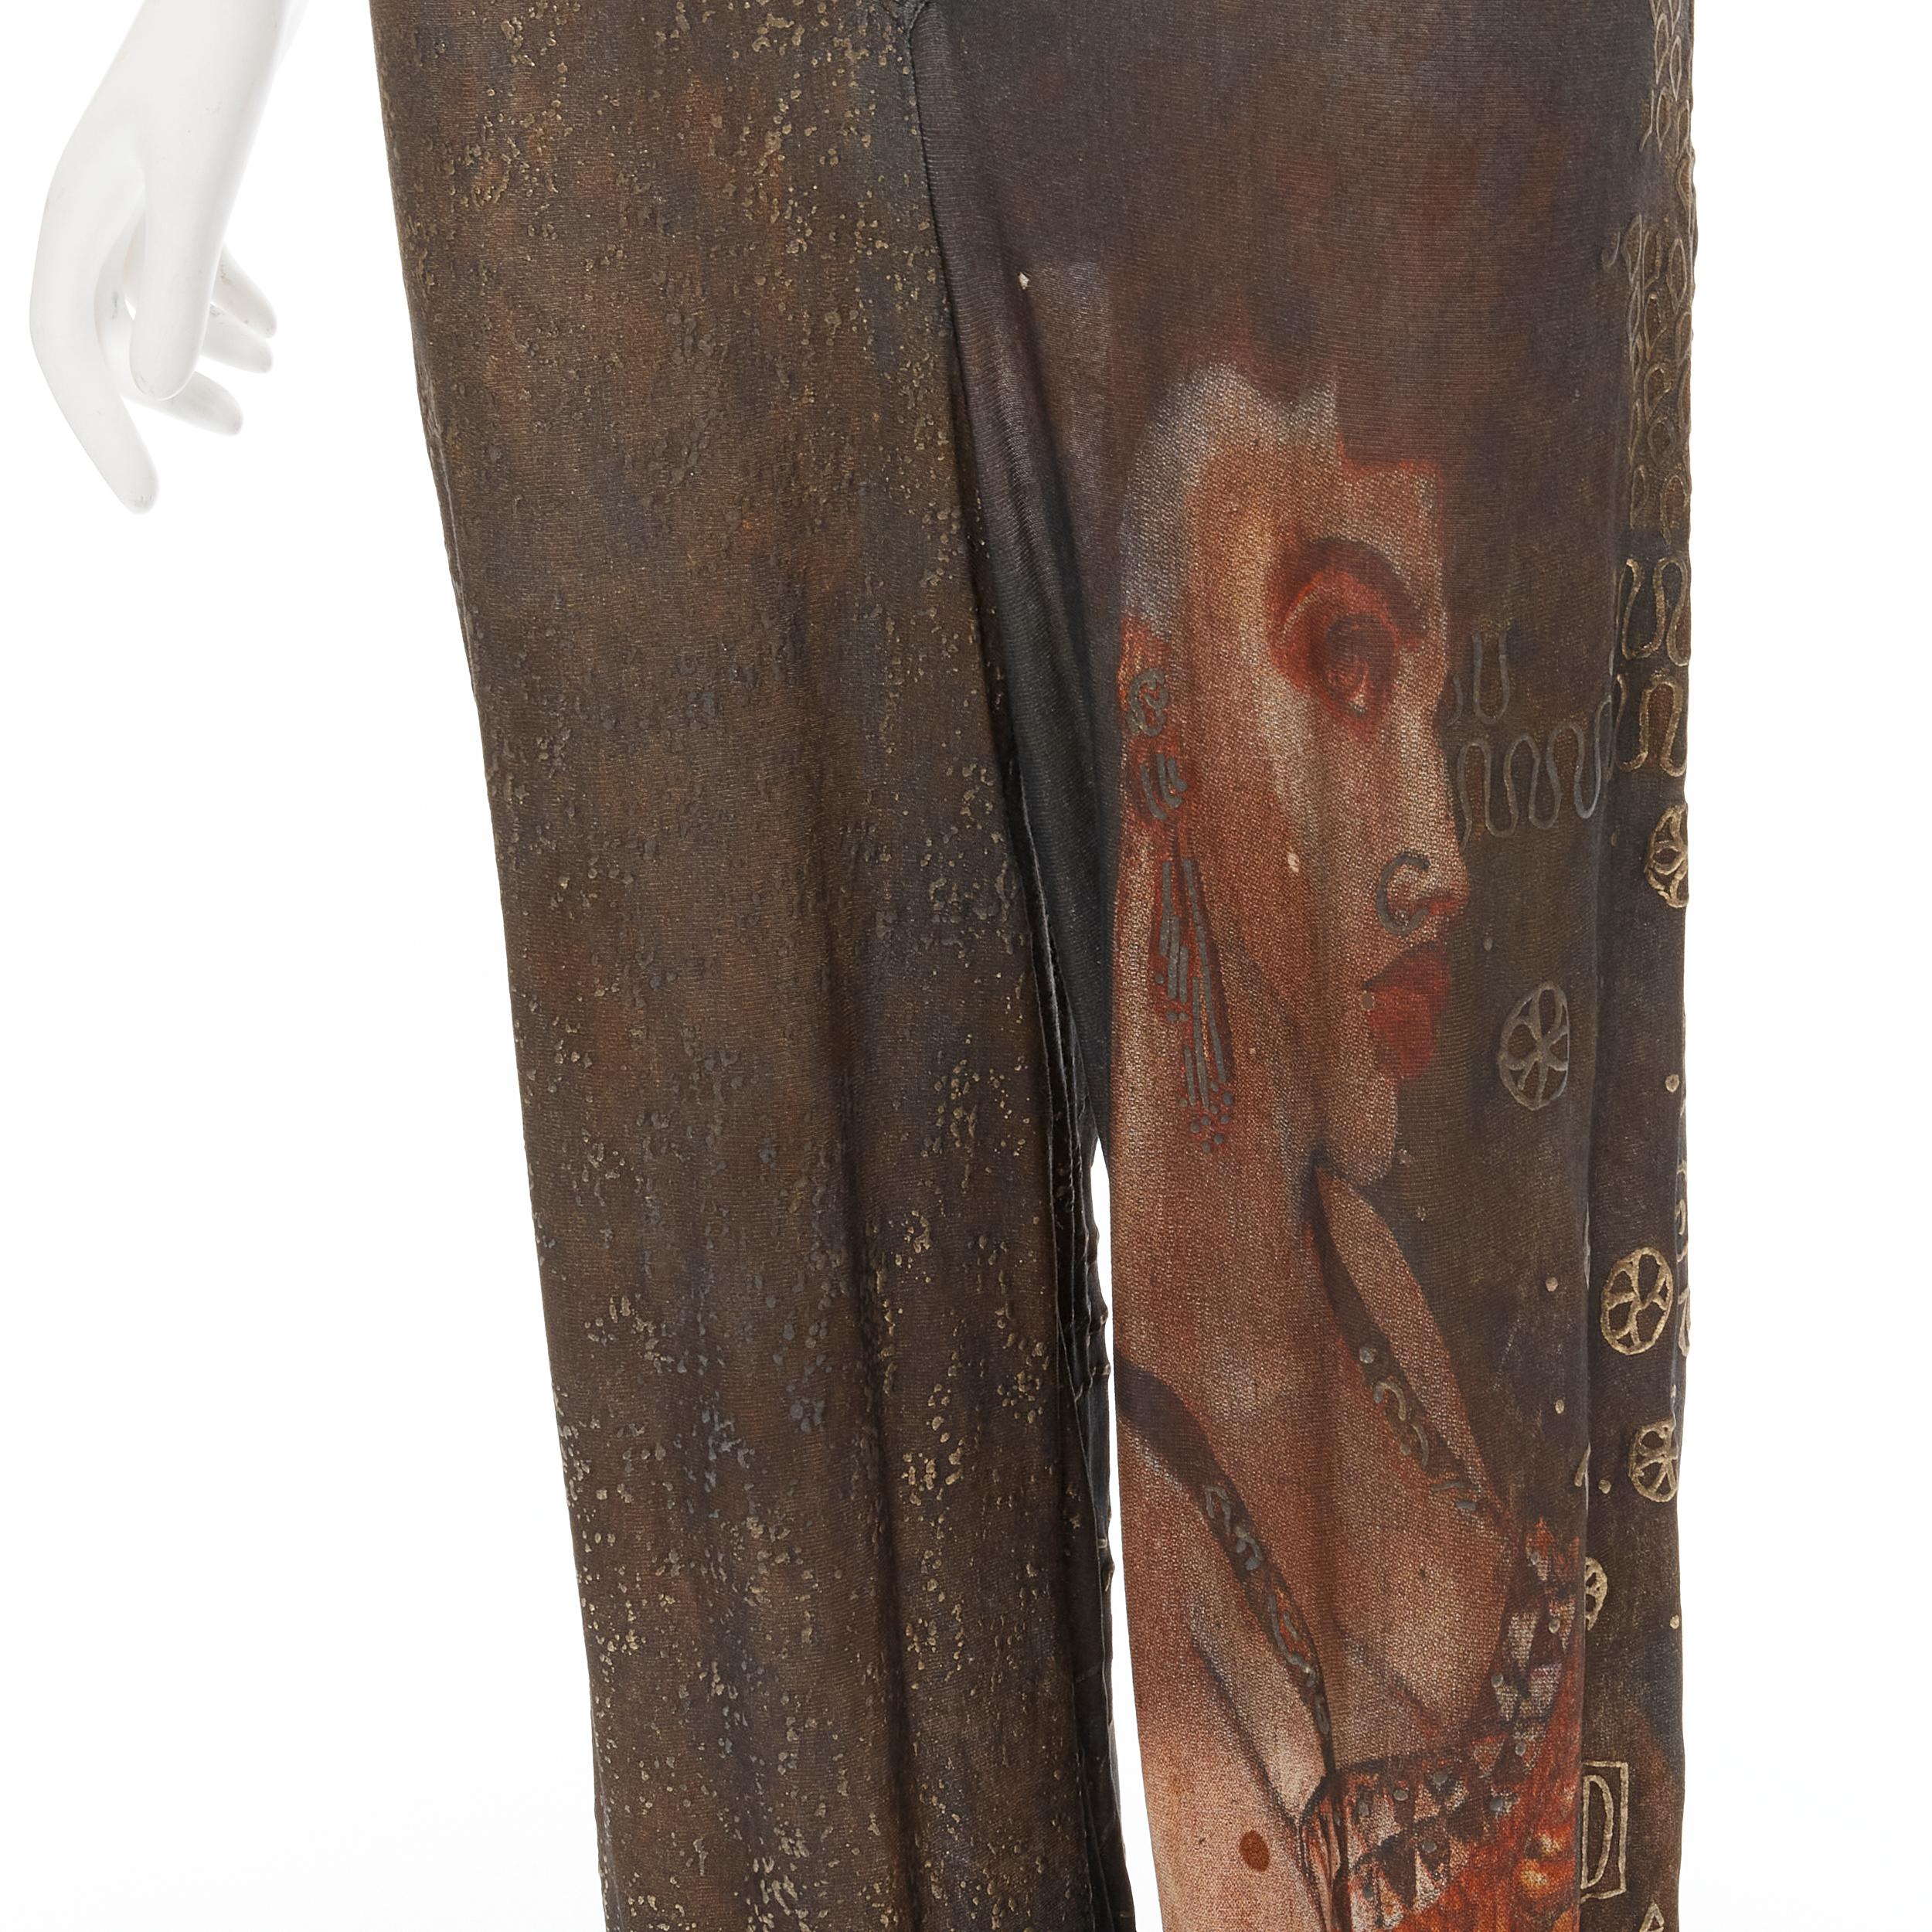 JEAN PAUL GAULTIER Vintage 1989 Klimt ethnic face print jumpsuit IT38 S 
Reference: CNLE/A00149 
Brand: Jean Paul Gaultier 
Designer: Jean Paul Gaultier 
Collection: 1980's 
Material: Viscose 
Color: Brown 
Pattern: Abstract 
Closure: Button Extra